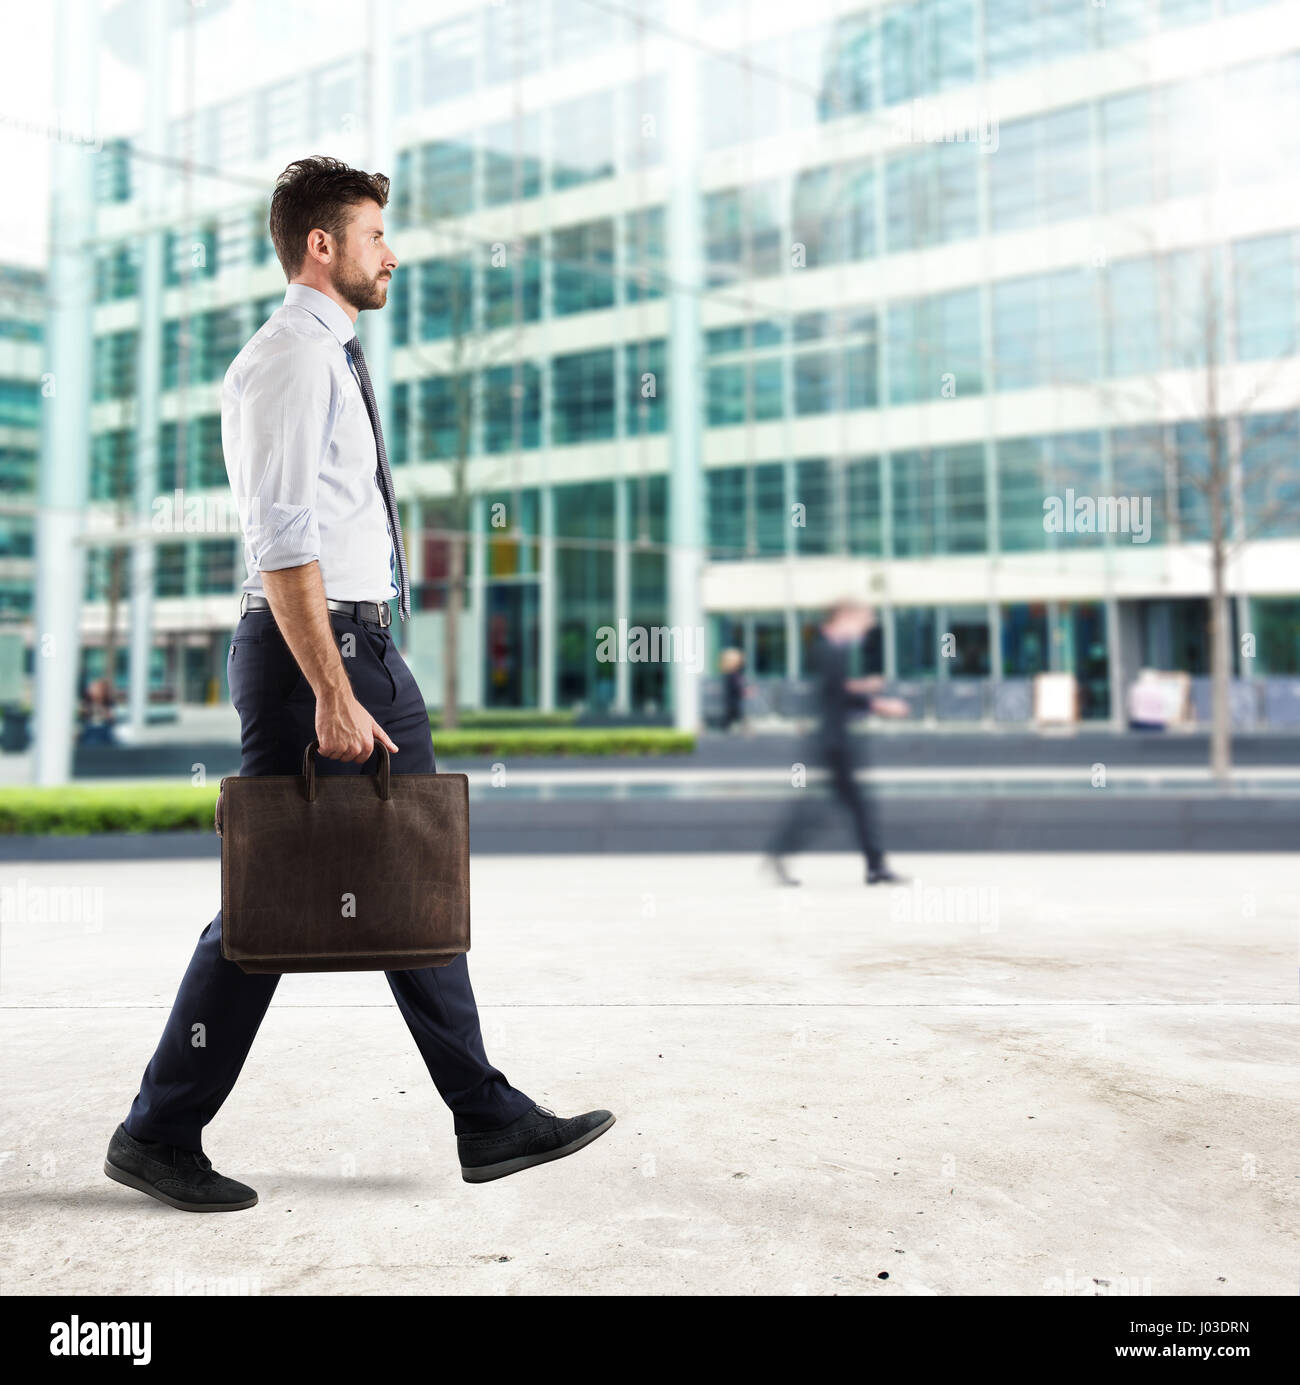 Businessman in the city Stock Photo